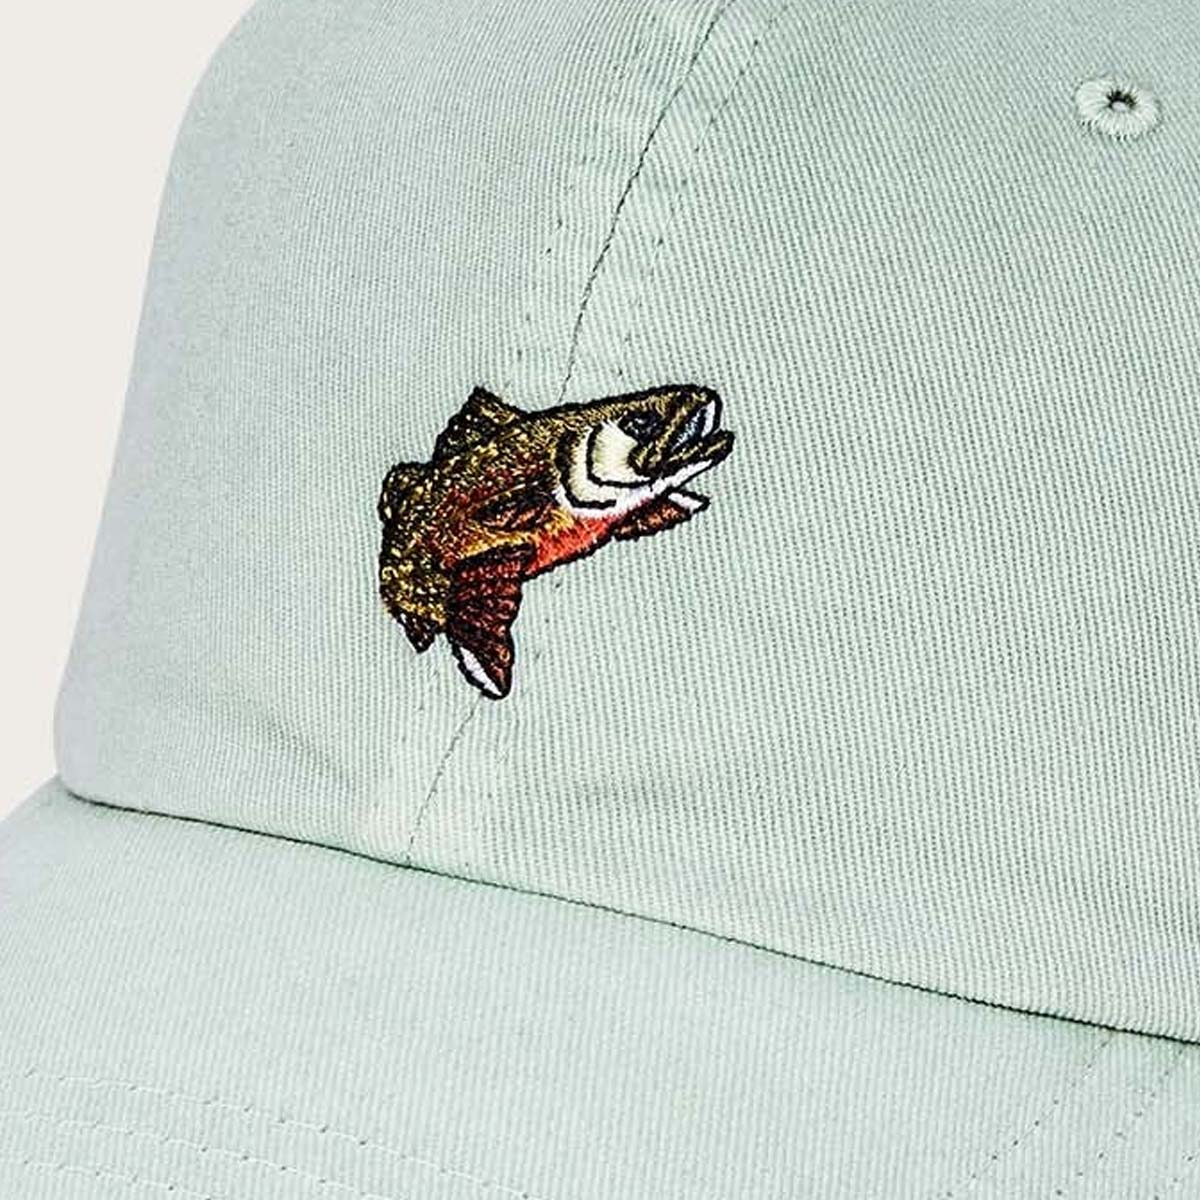 Filson Washed Low Profile Cap Mint/Trout, cap that protects your head from the elements